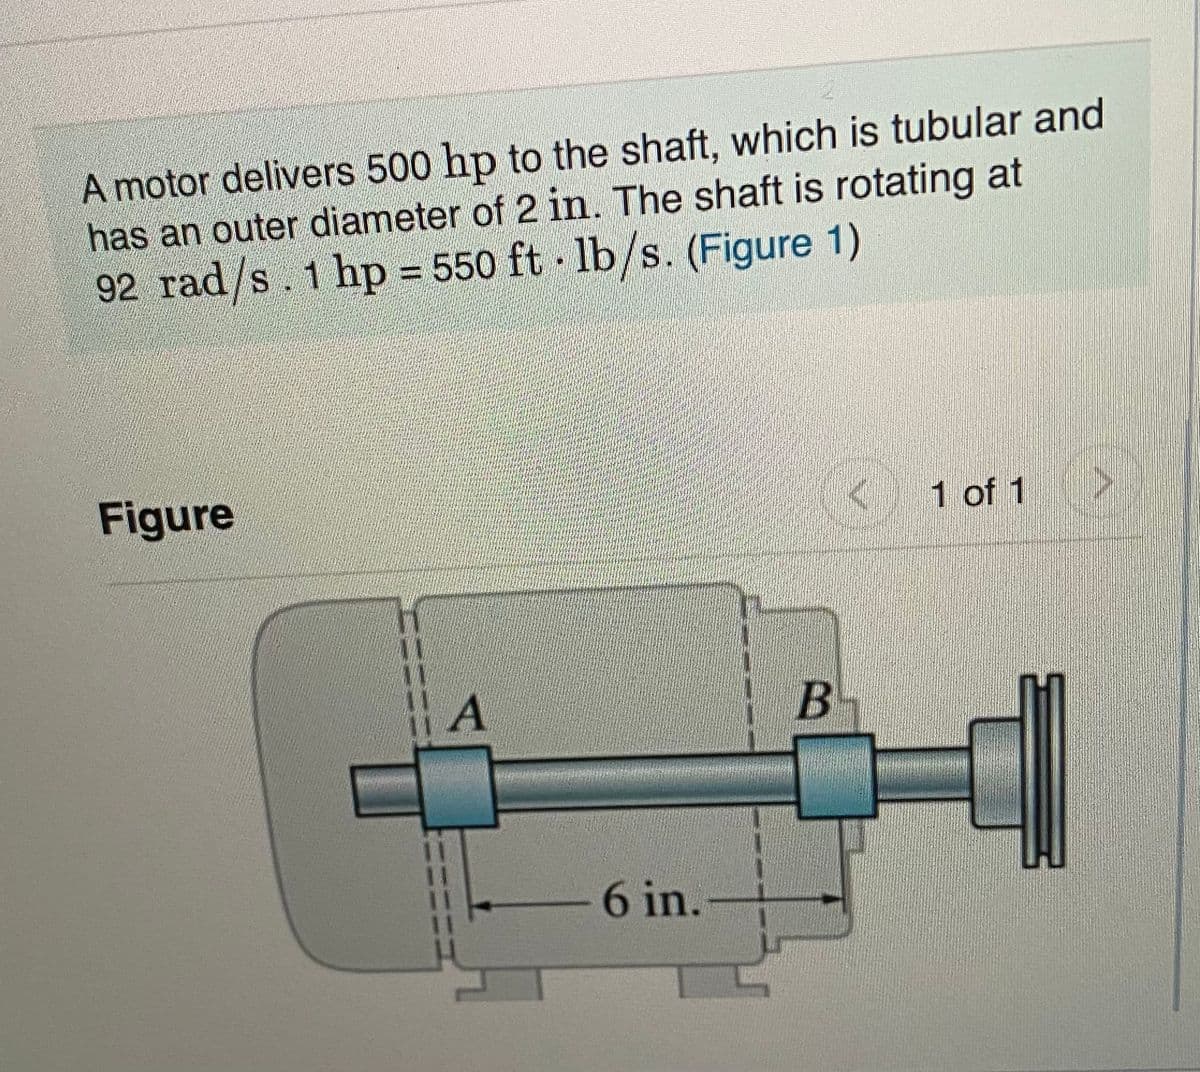 2.
A motor delivers 500 hp to the shaft, which is tubular and
has an outer diameter of 2 in. The shaft is rotating at
92 rad/s. 1 hp = 550 ft - lb/s. (Figure 1)
Figure
1 of 1
6 in.
